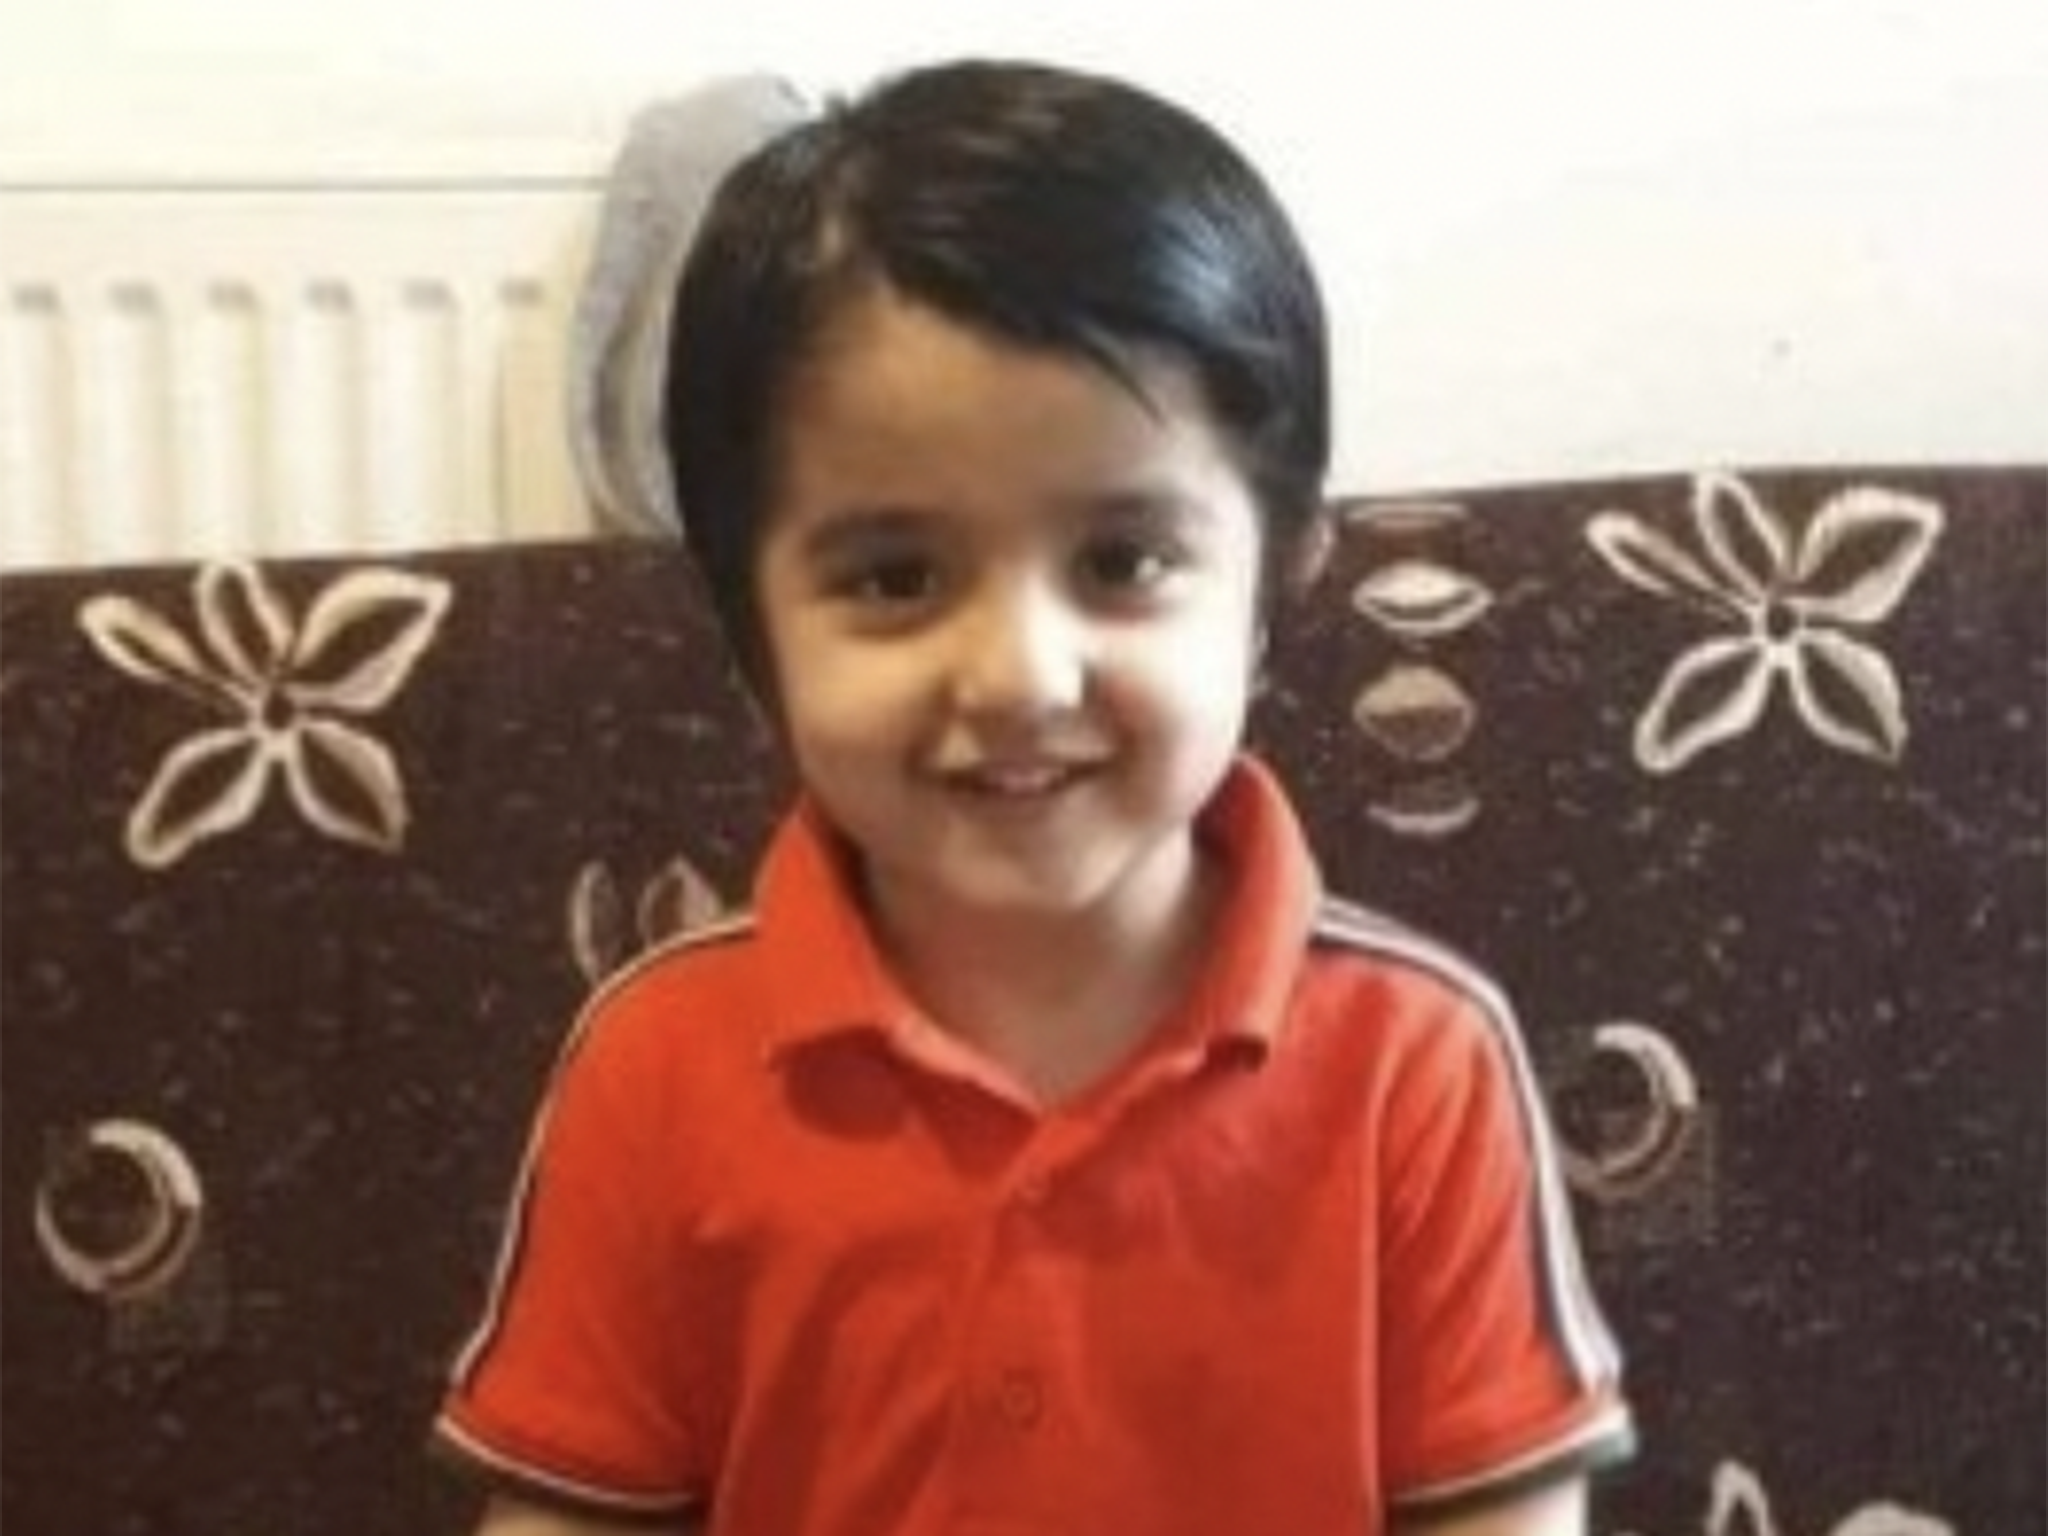 Muhammad Ibrahim Ali was just four years-old when he passed away in November